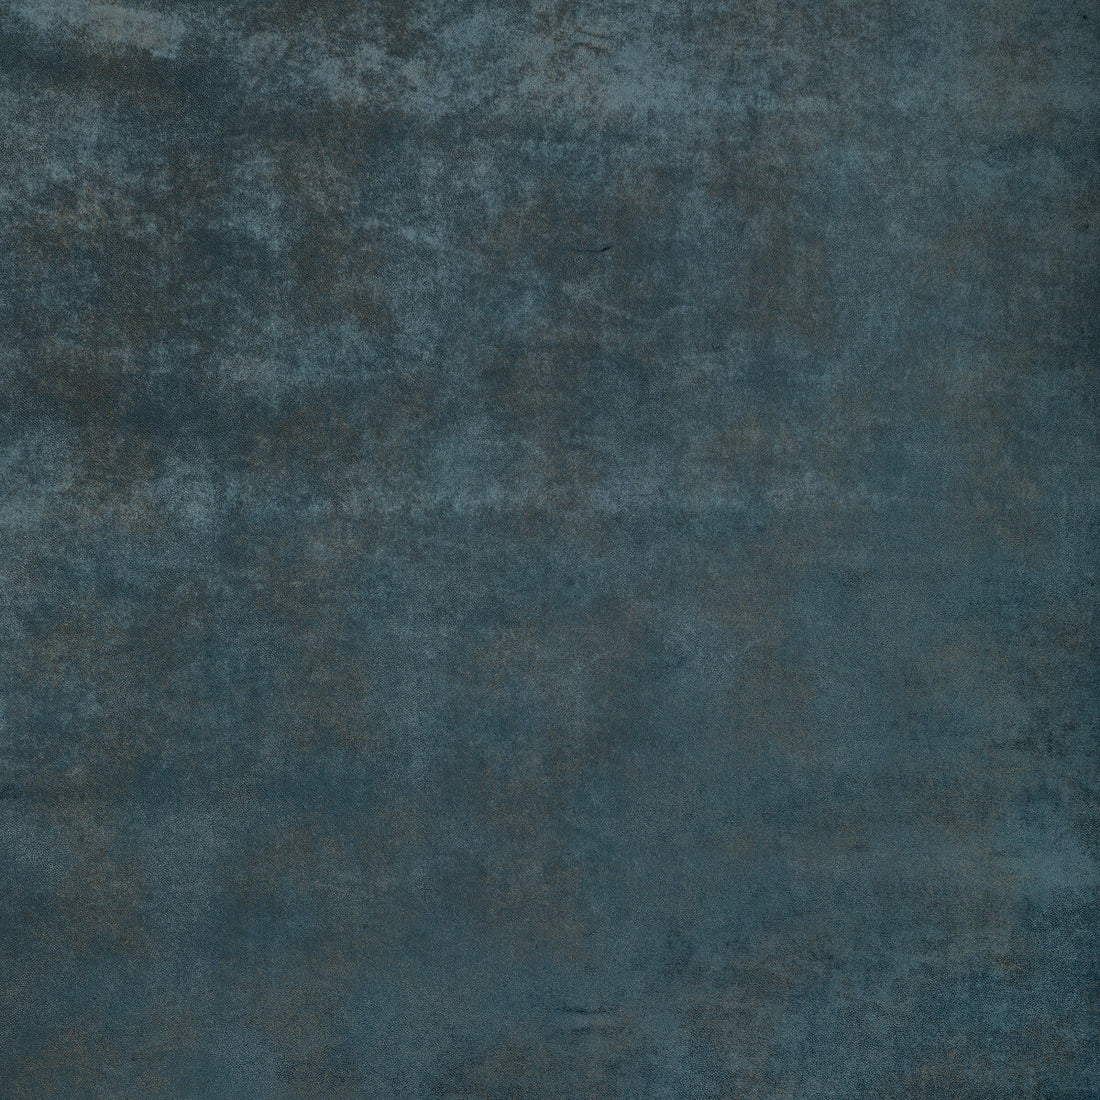 Gilded Dust fabric in water blue color - pattern 36336.5.0 - by Kravet Couture in the Modern Luxe III collection